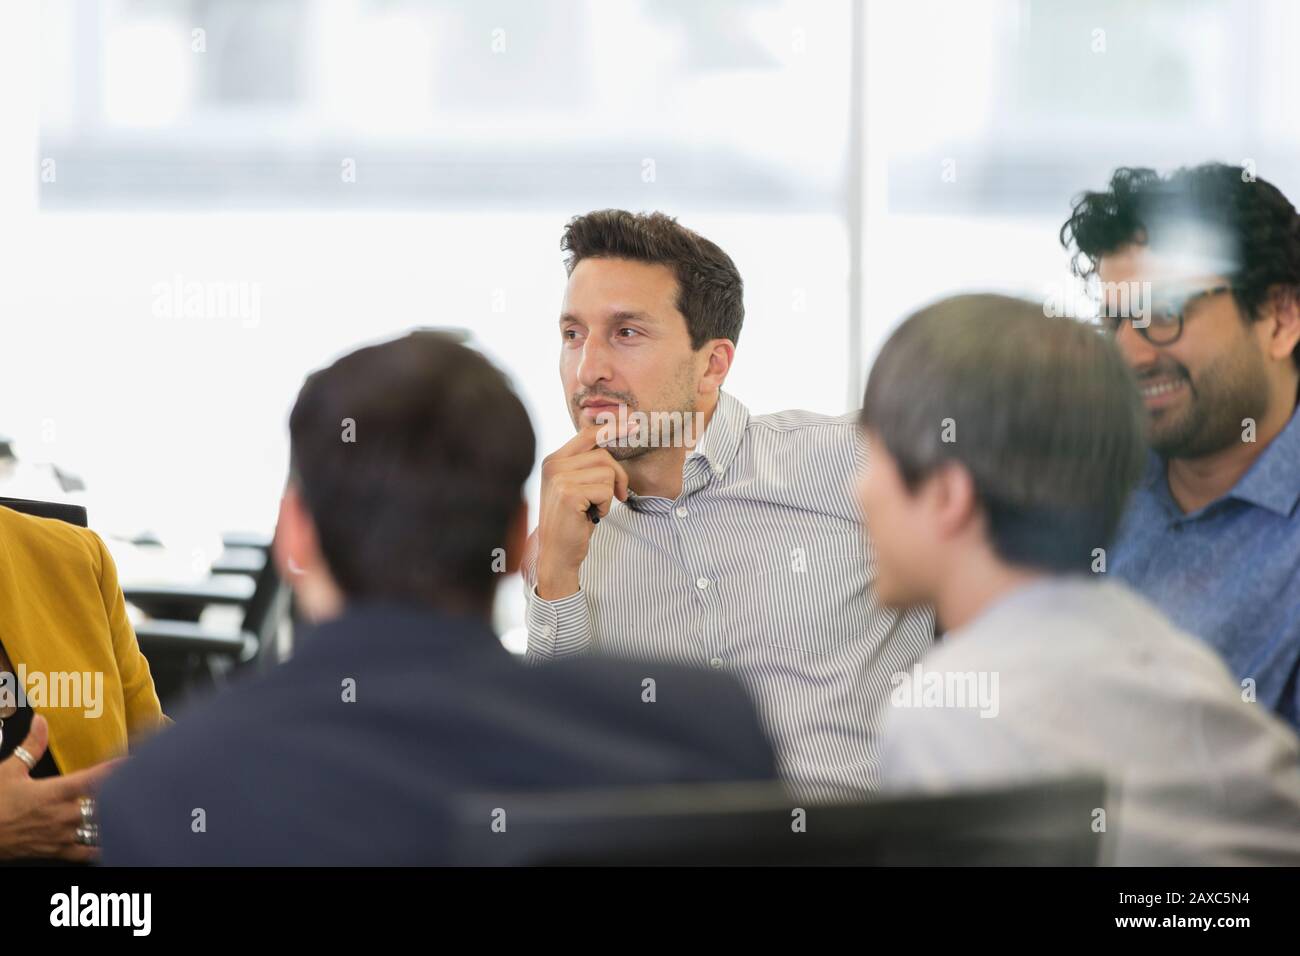 Focused businessman listening in conference room meeting Stock Photo